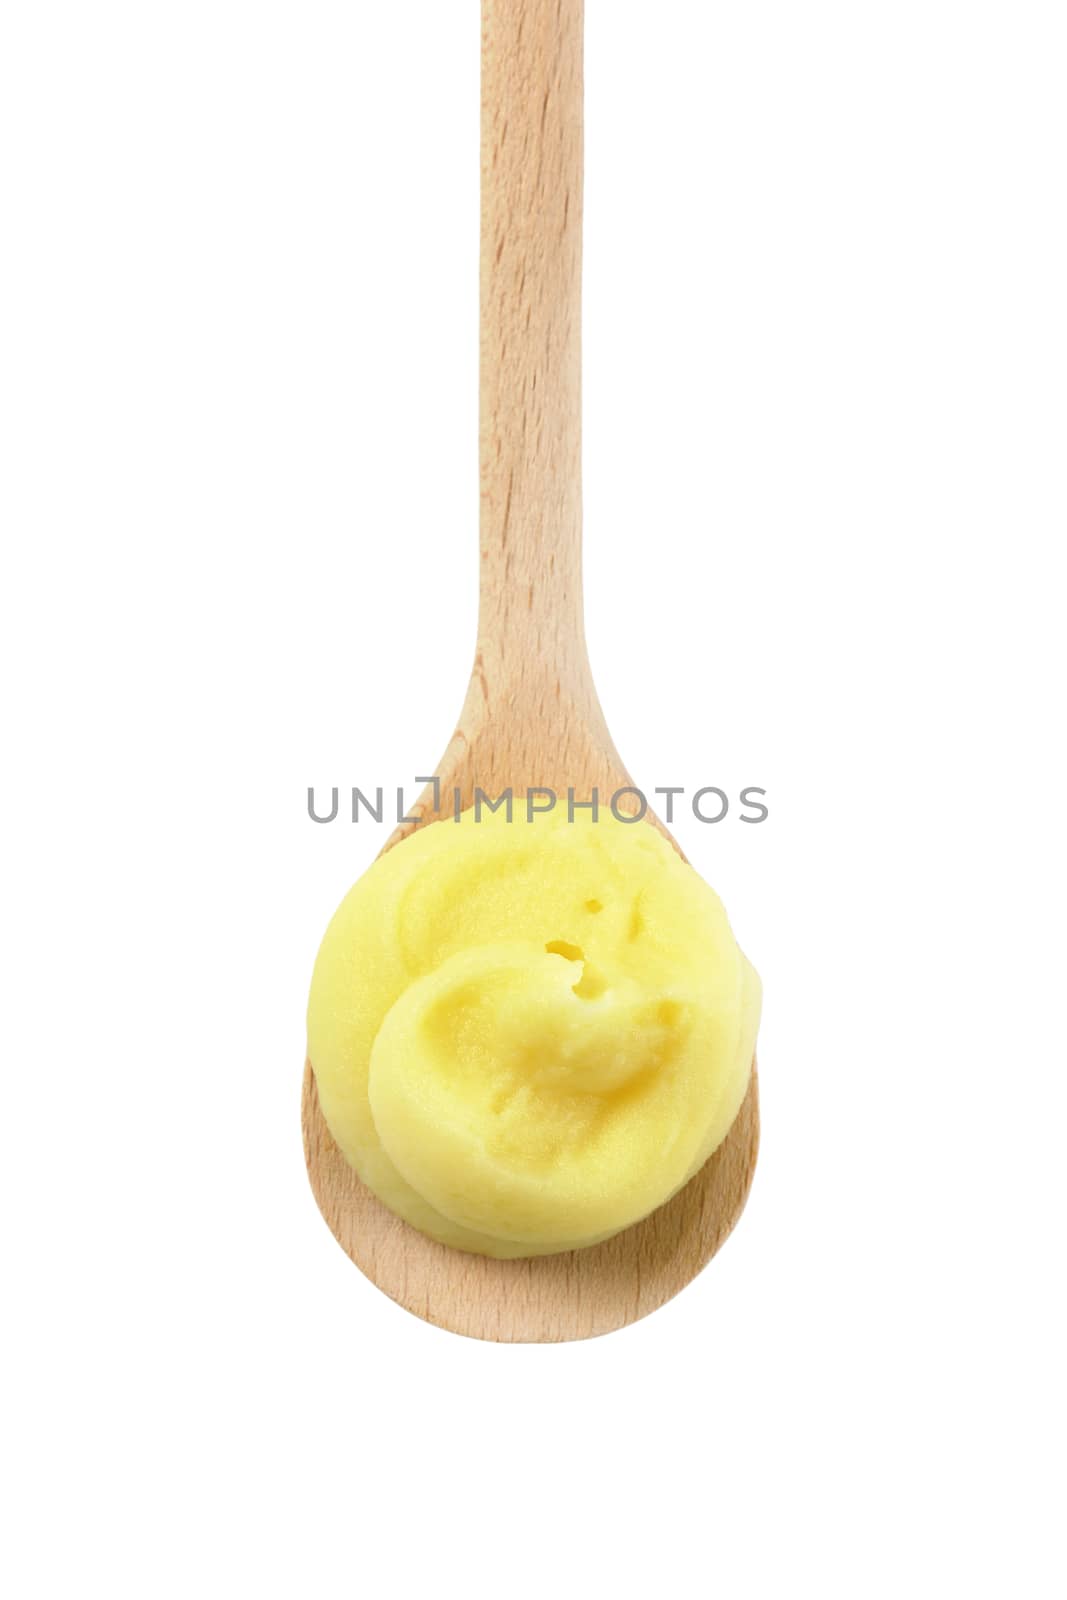 mashed potatoes on wooden spoon by Digifoodstock